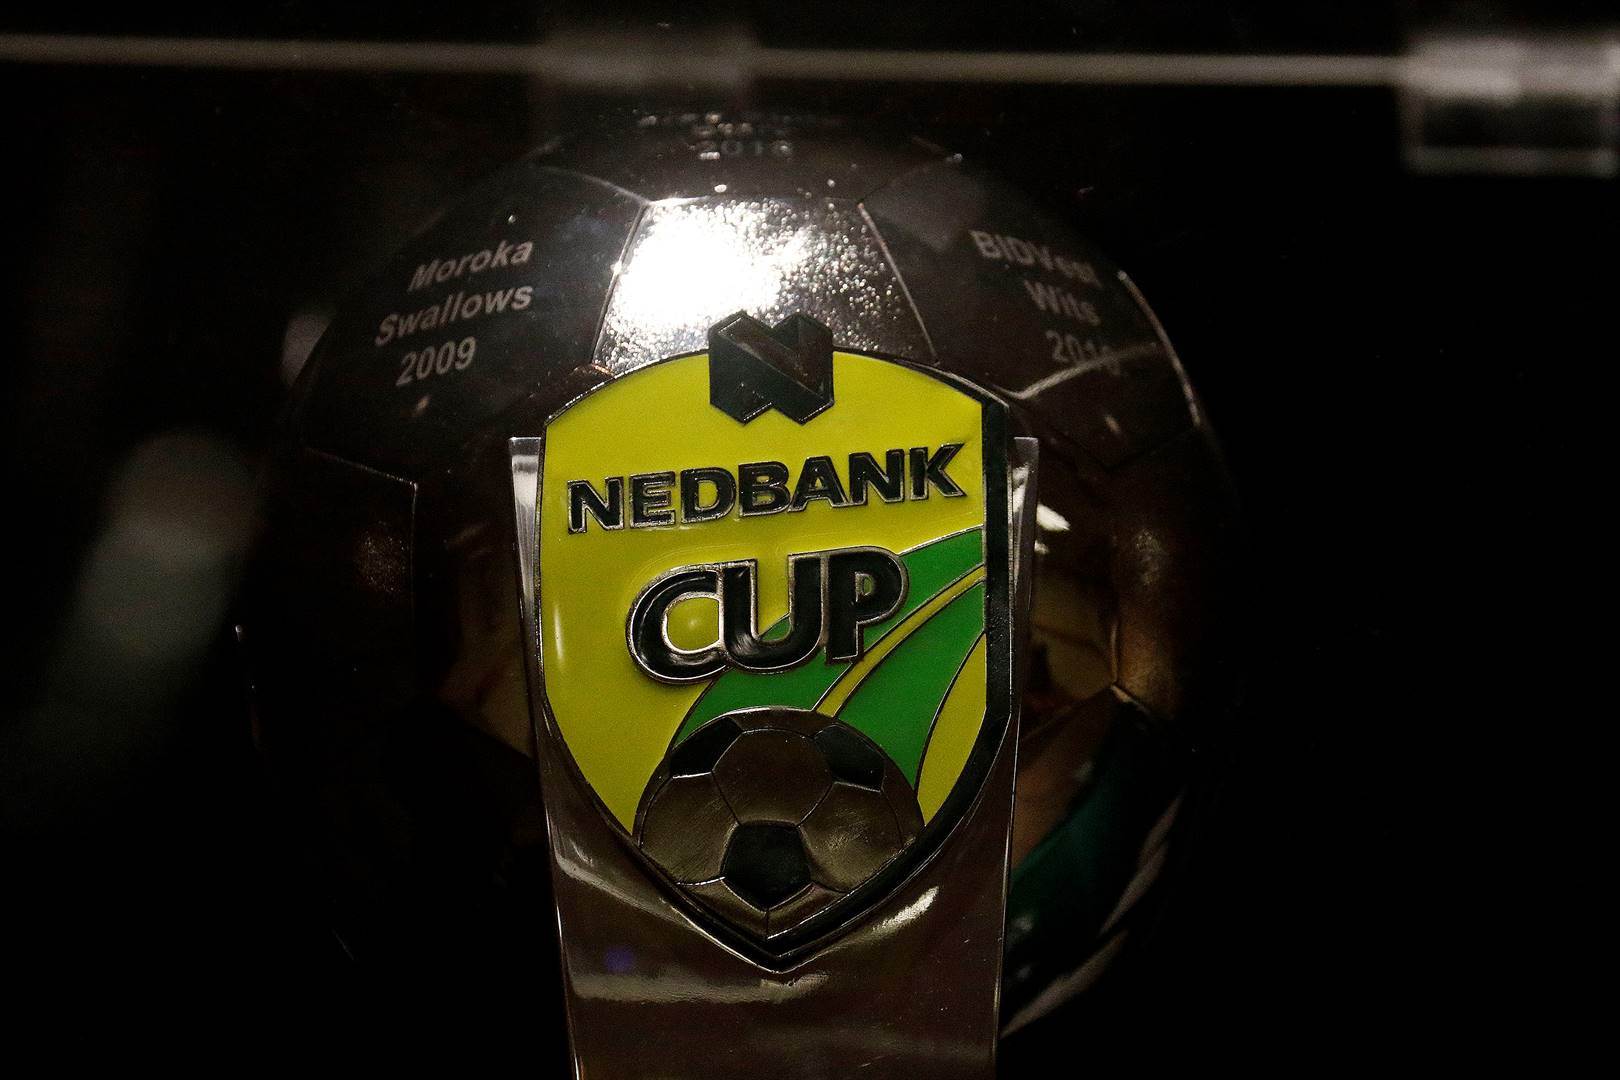 Scroll right to see the Nedbank Cup award nominees